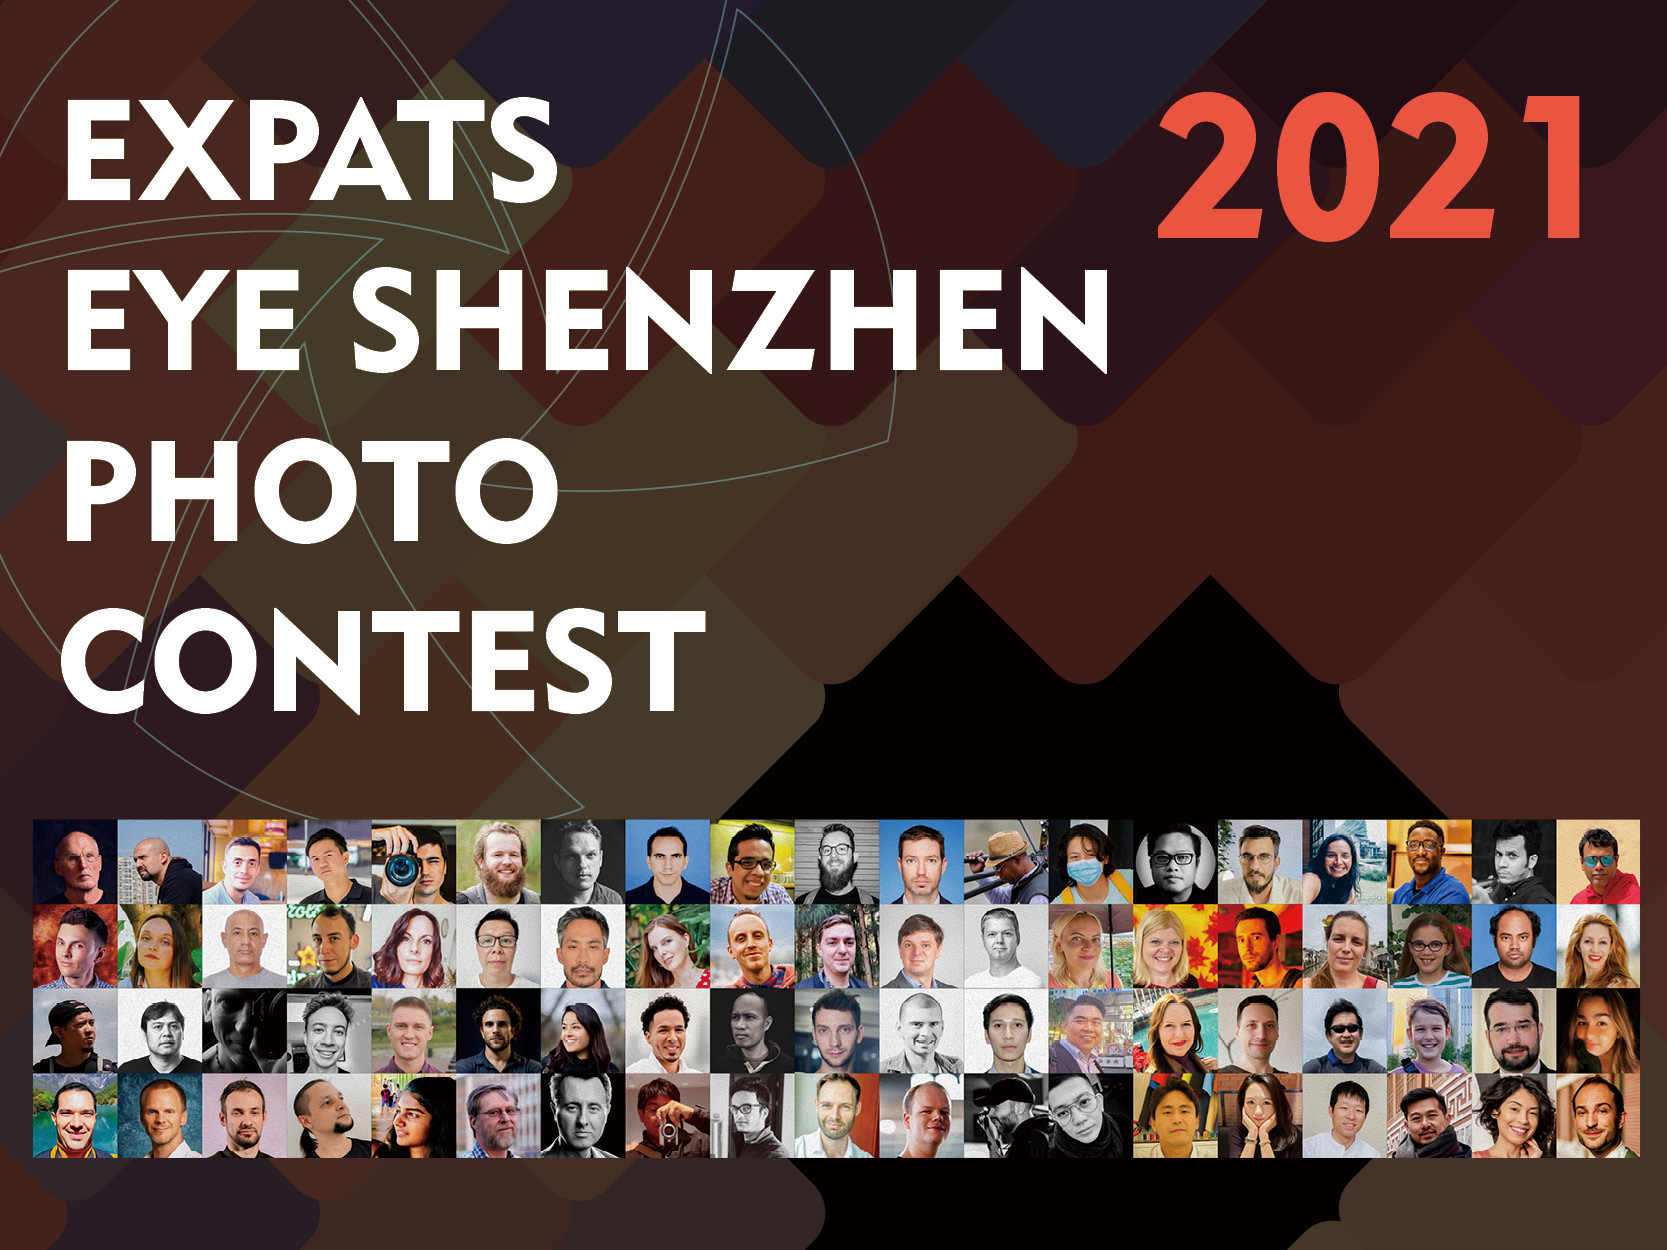 The 3rd Expats Eye Shenzhen Photo Contest